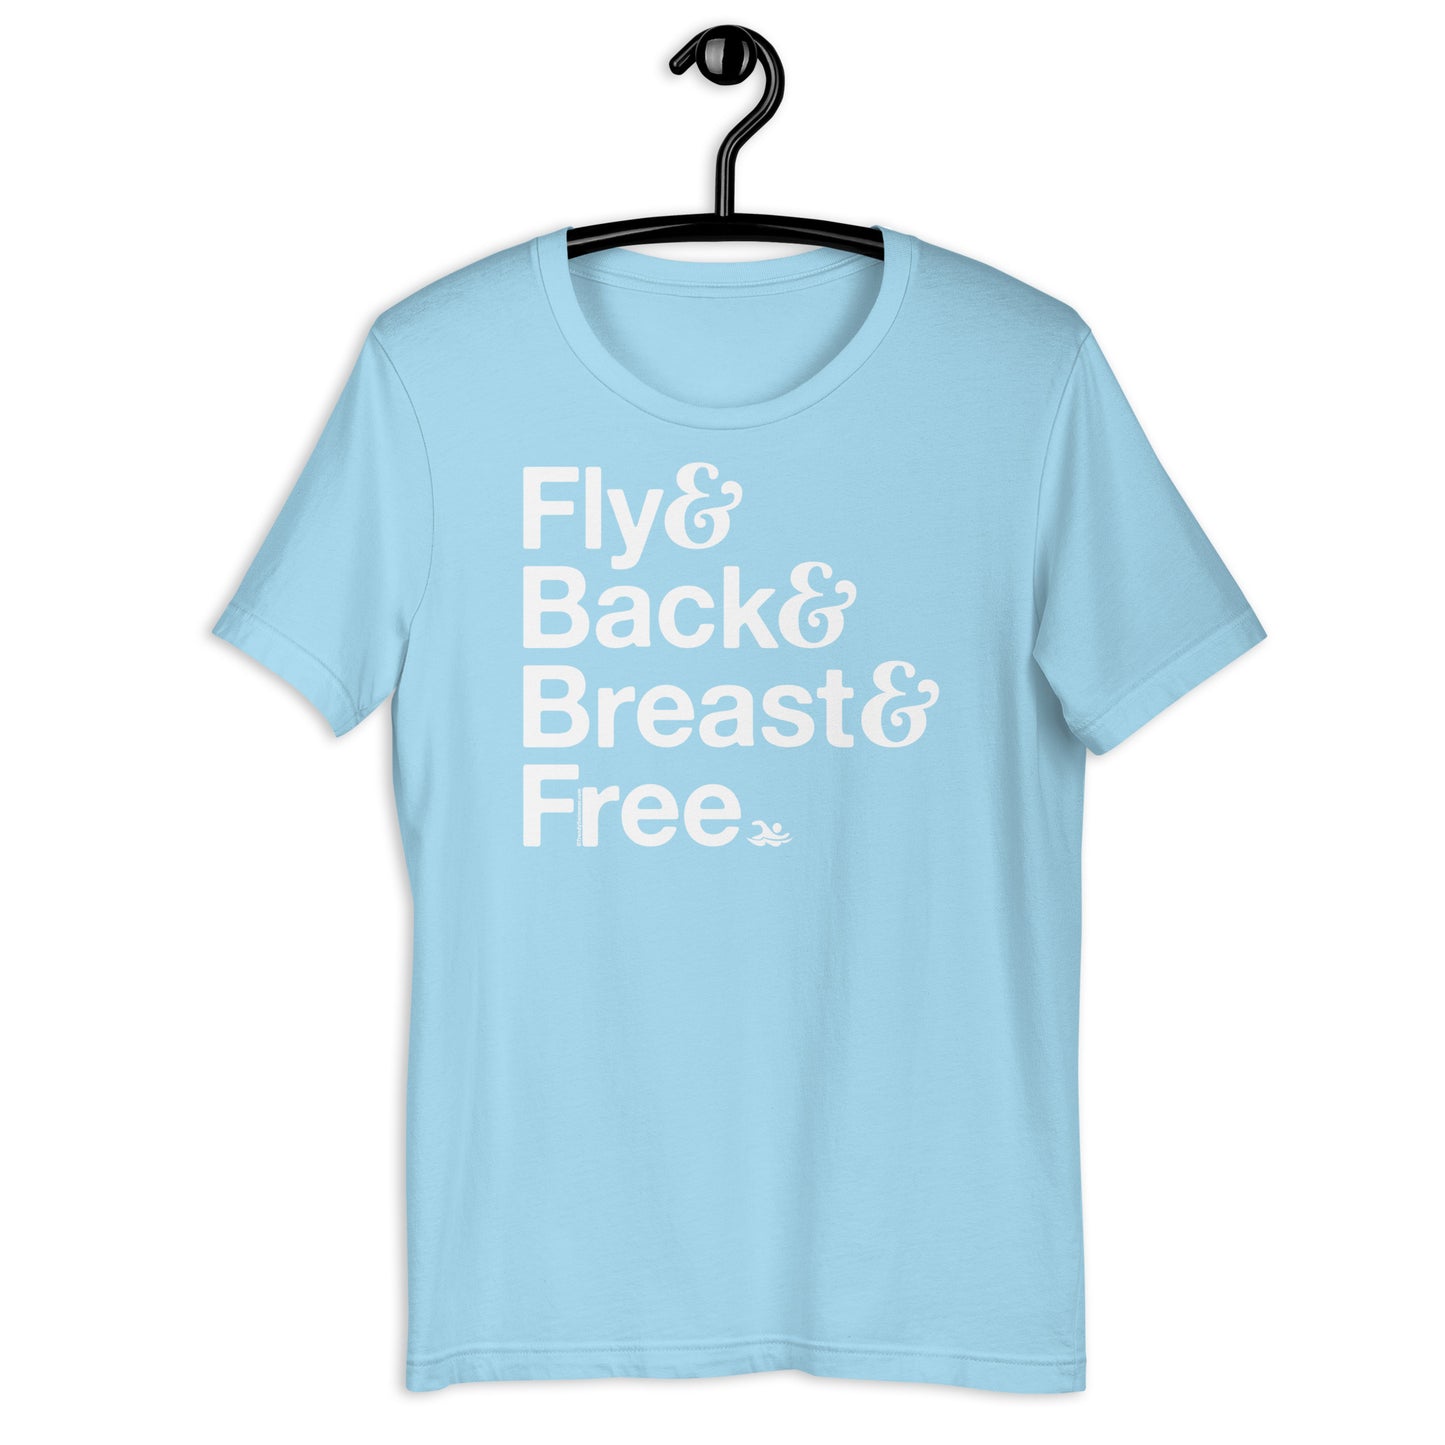 Fly Back Breast and Free IM Premium T-shirt - TrendySwimmer